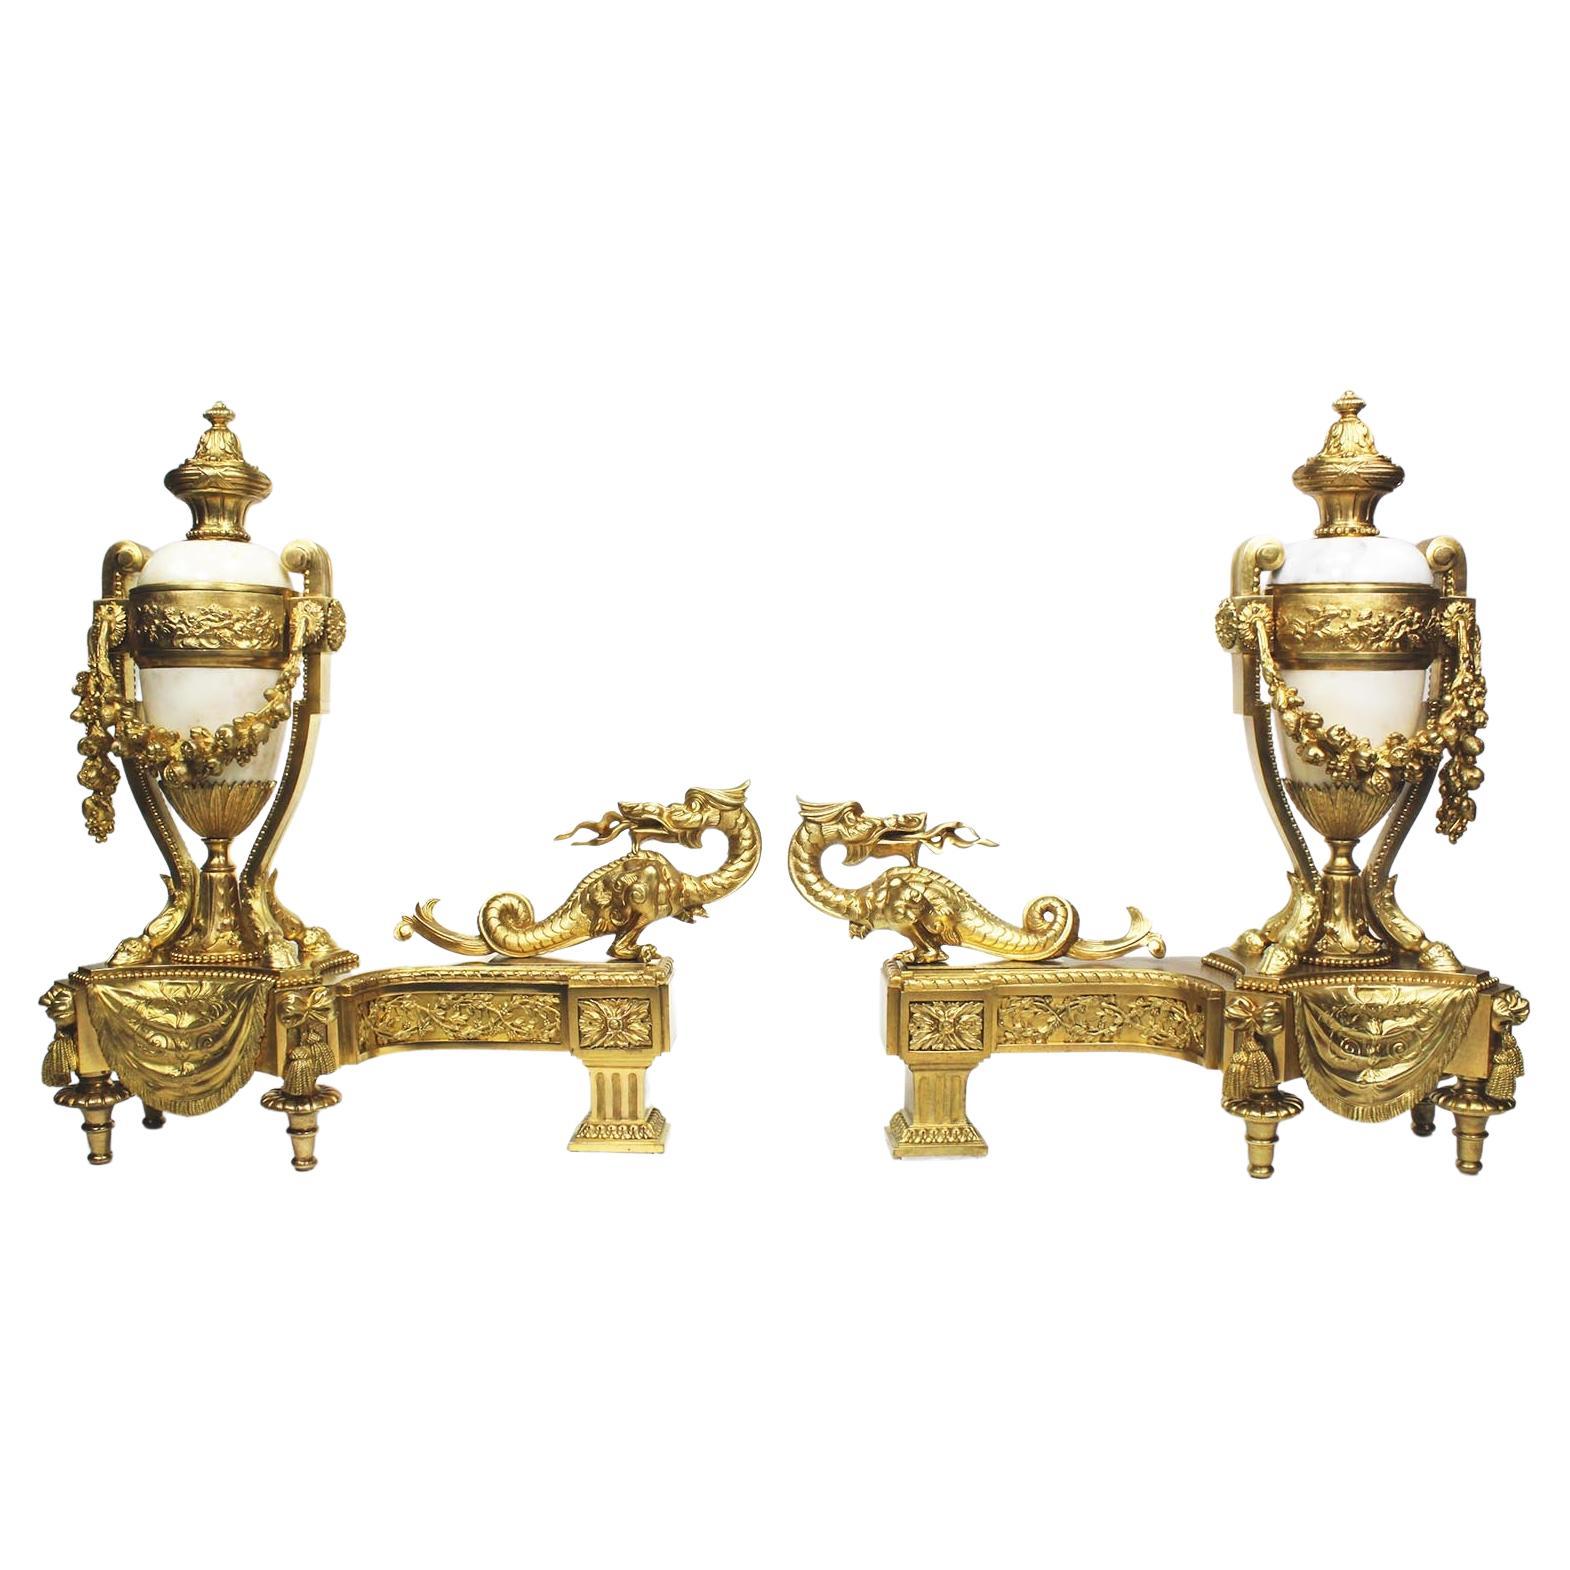 Pair French 19th Century Japonisme Style Gilt-Bronze & Marble Chenets, Bouhon